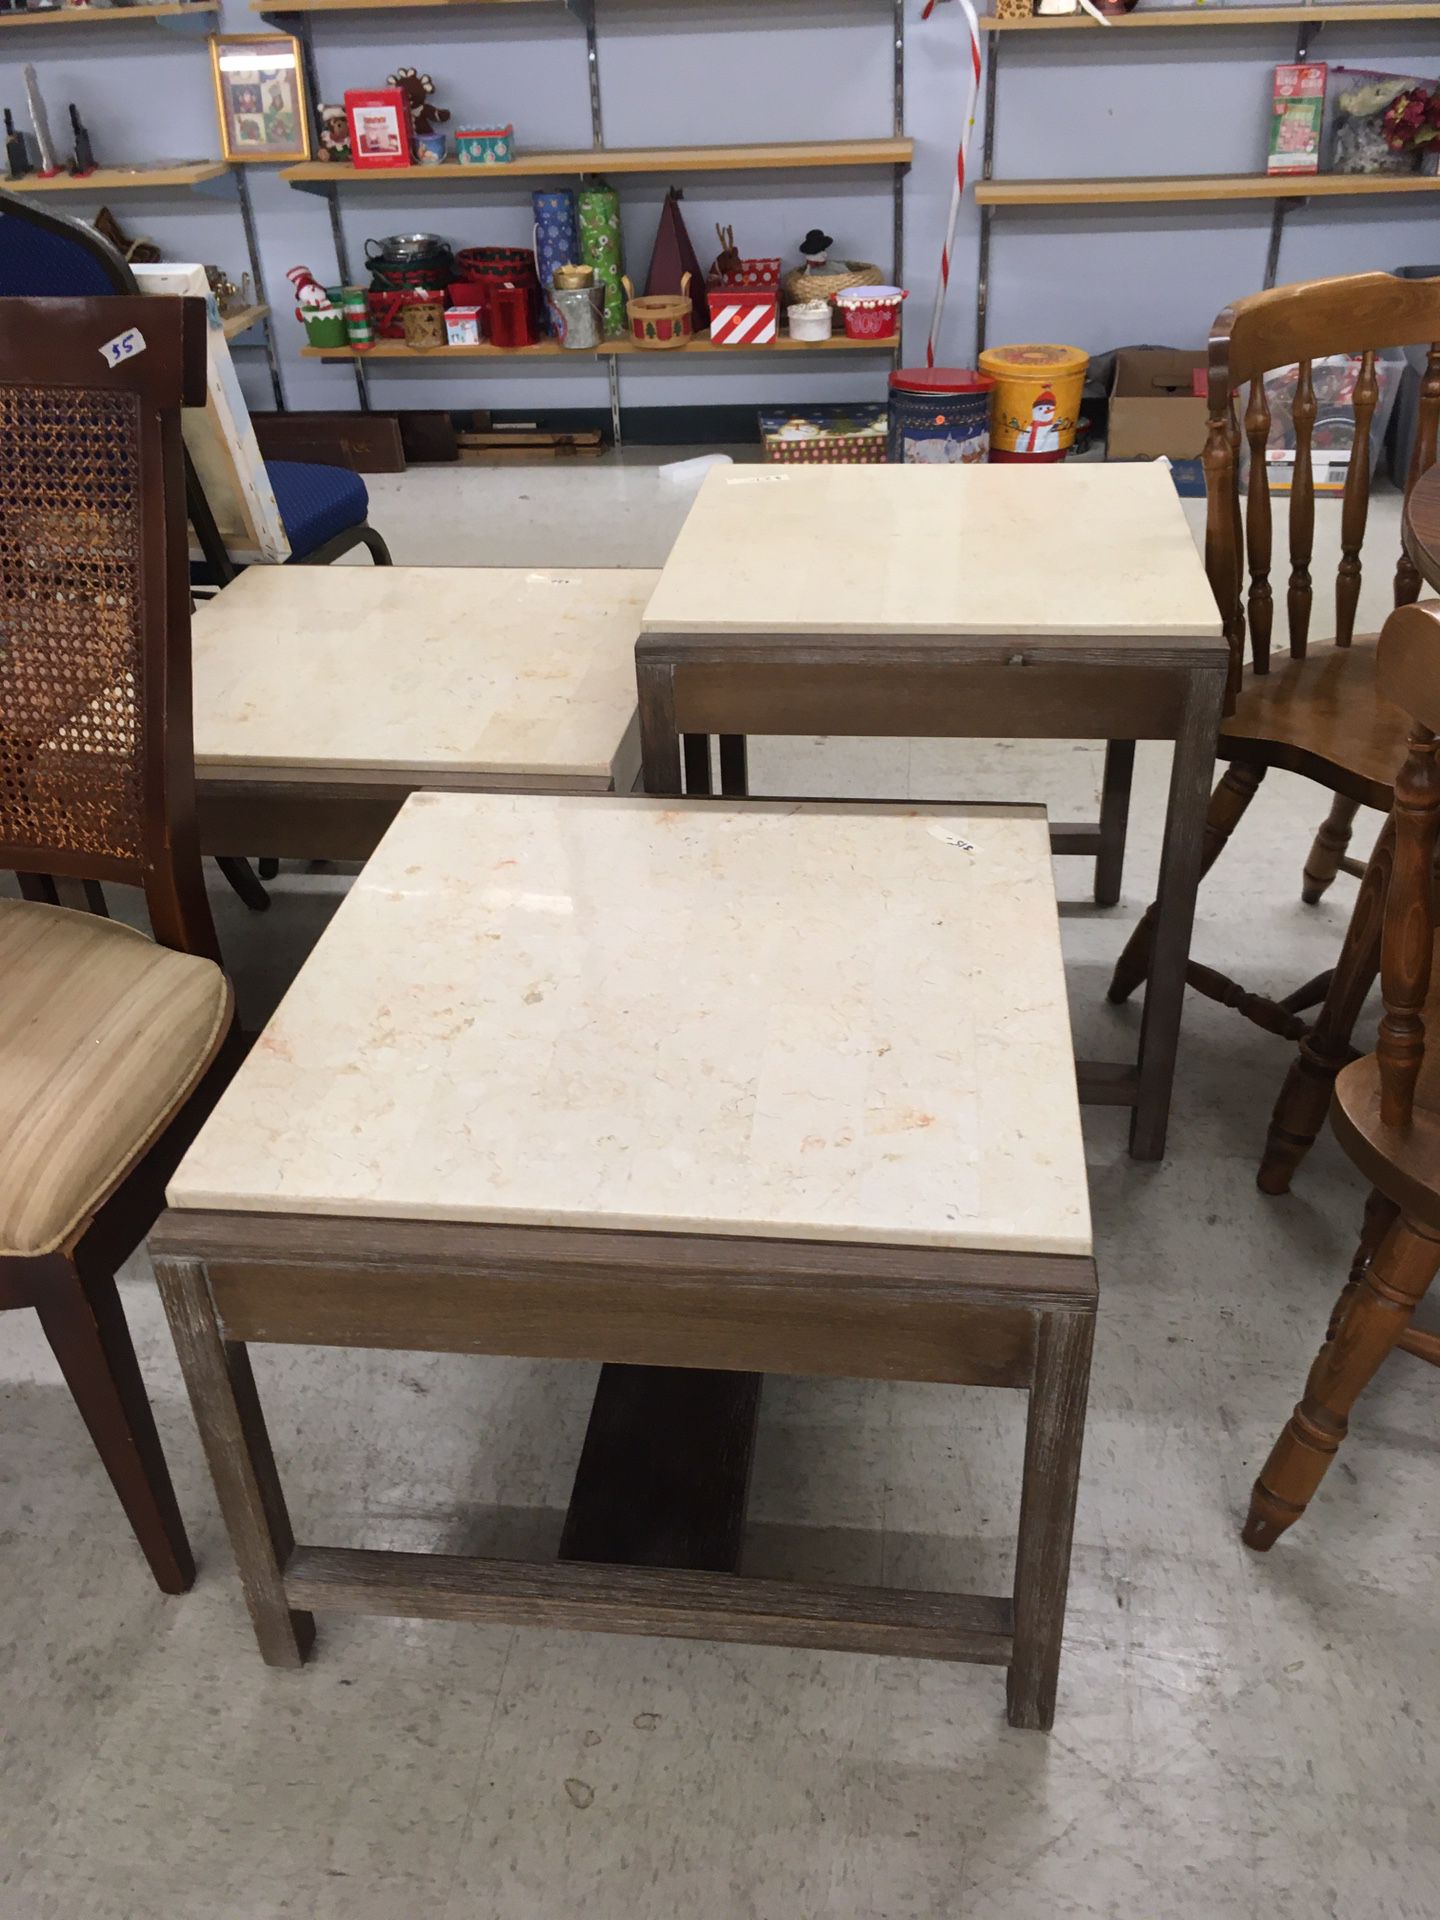 3 tables marble tops